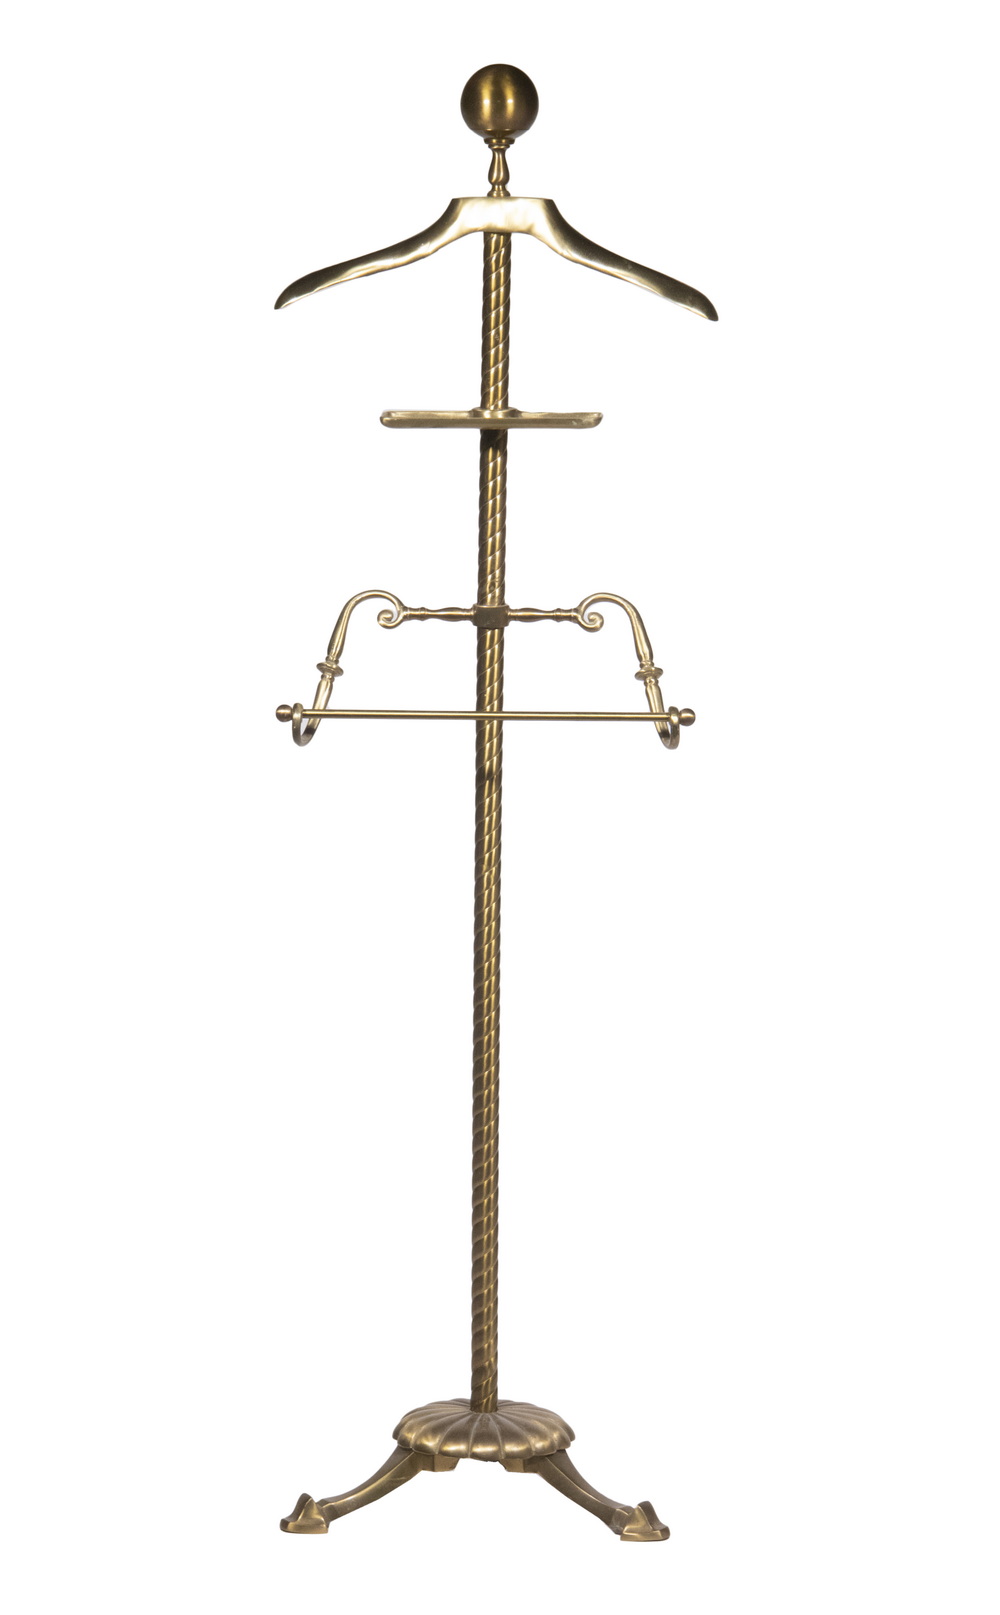 HEAVY CAST BRASS VALET STAND, 20TH